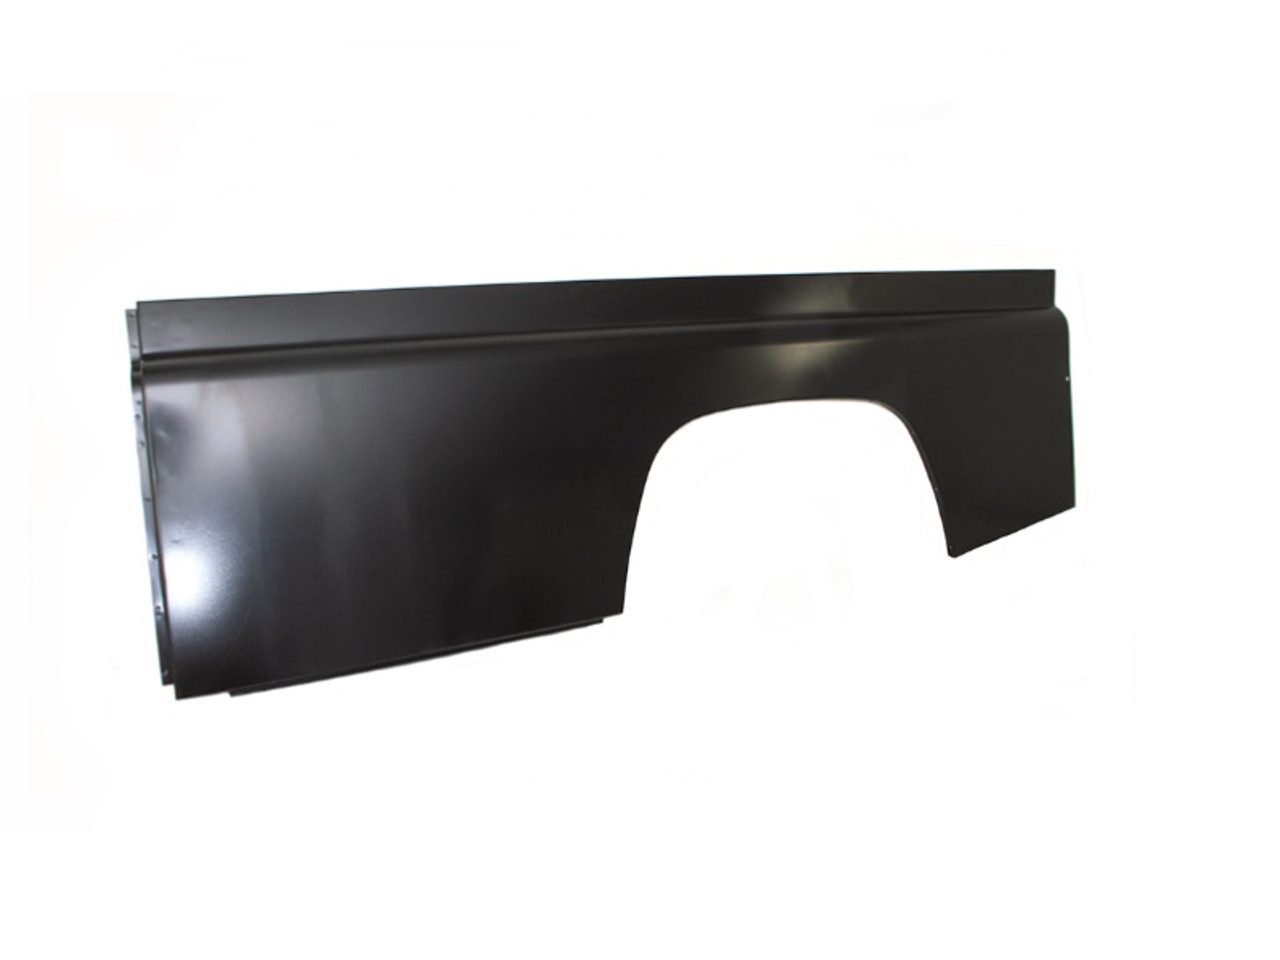 OEM Defender 110 LH Rear Body Side Panel From 1998 - RTC5712